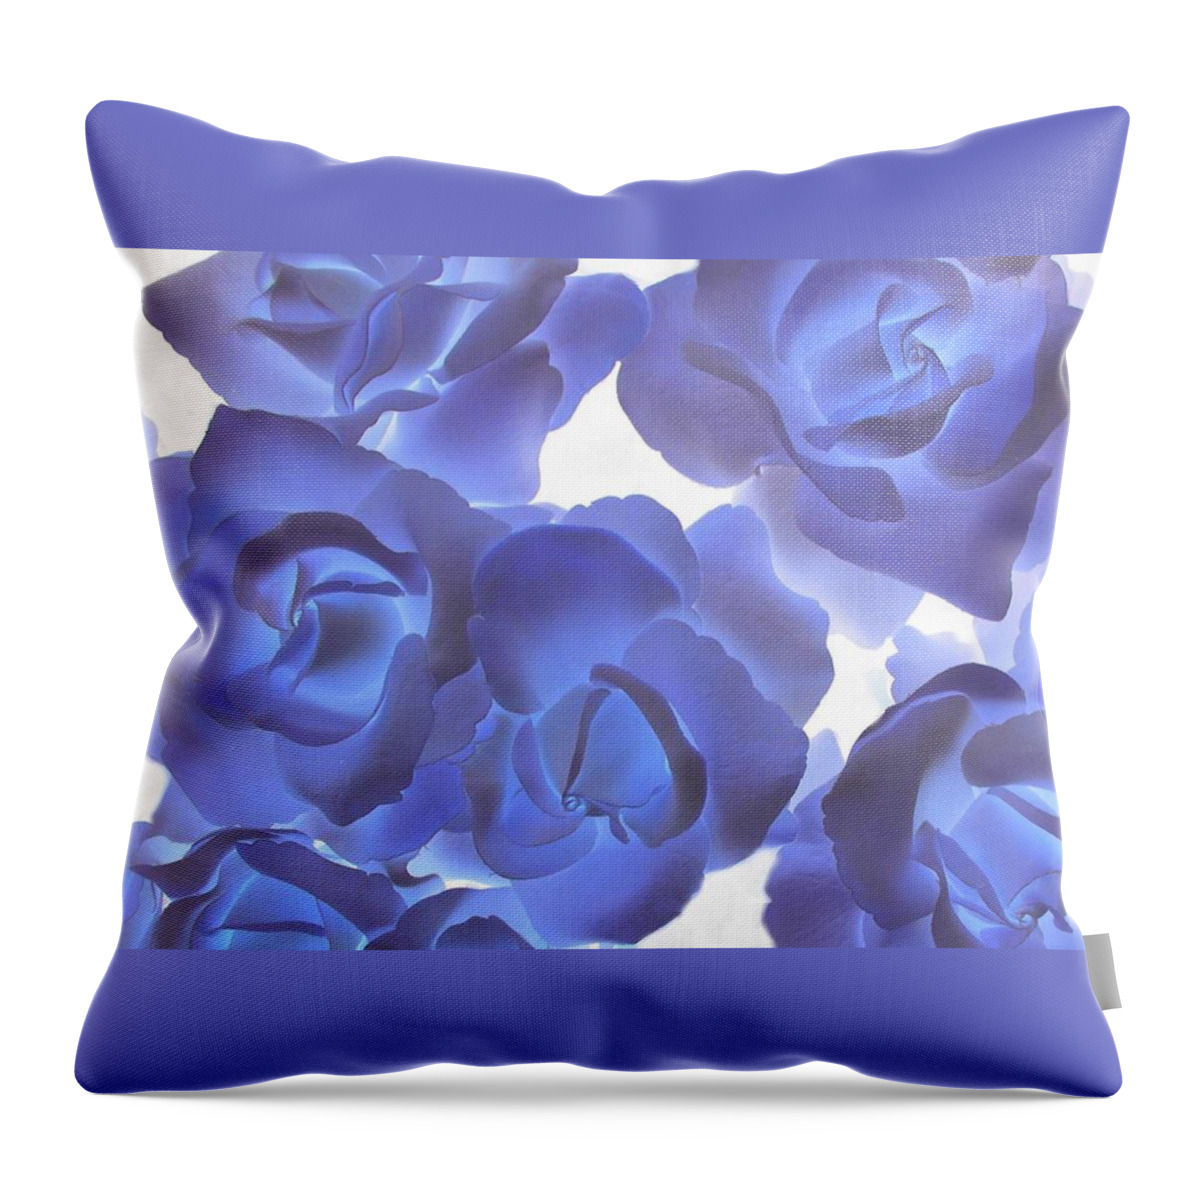 Blue Throw Pillow featuring the photograph Blue Roses by Tom Reynen